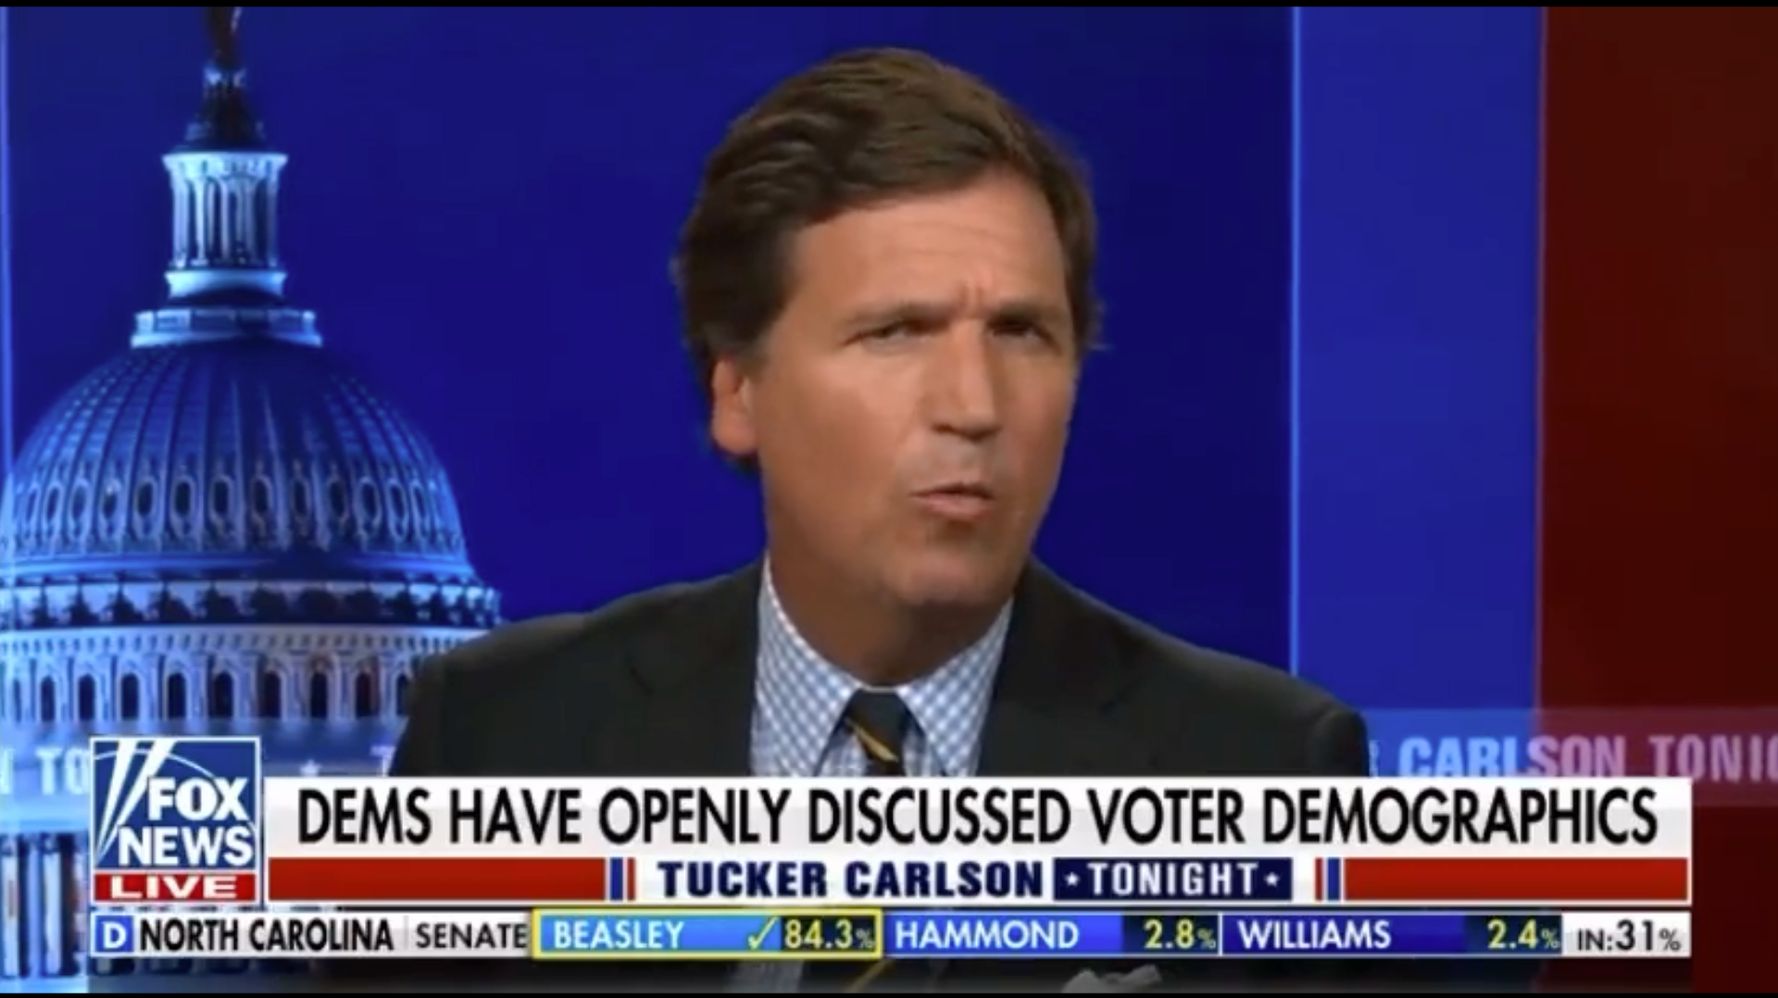 Tucker Carlson ‘Not Sure’ About Great Replacement Theory After Pushing It 400 Times